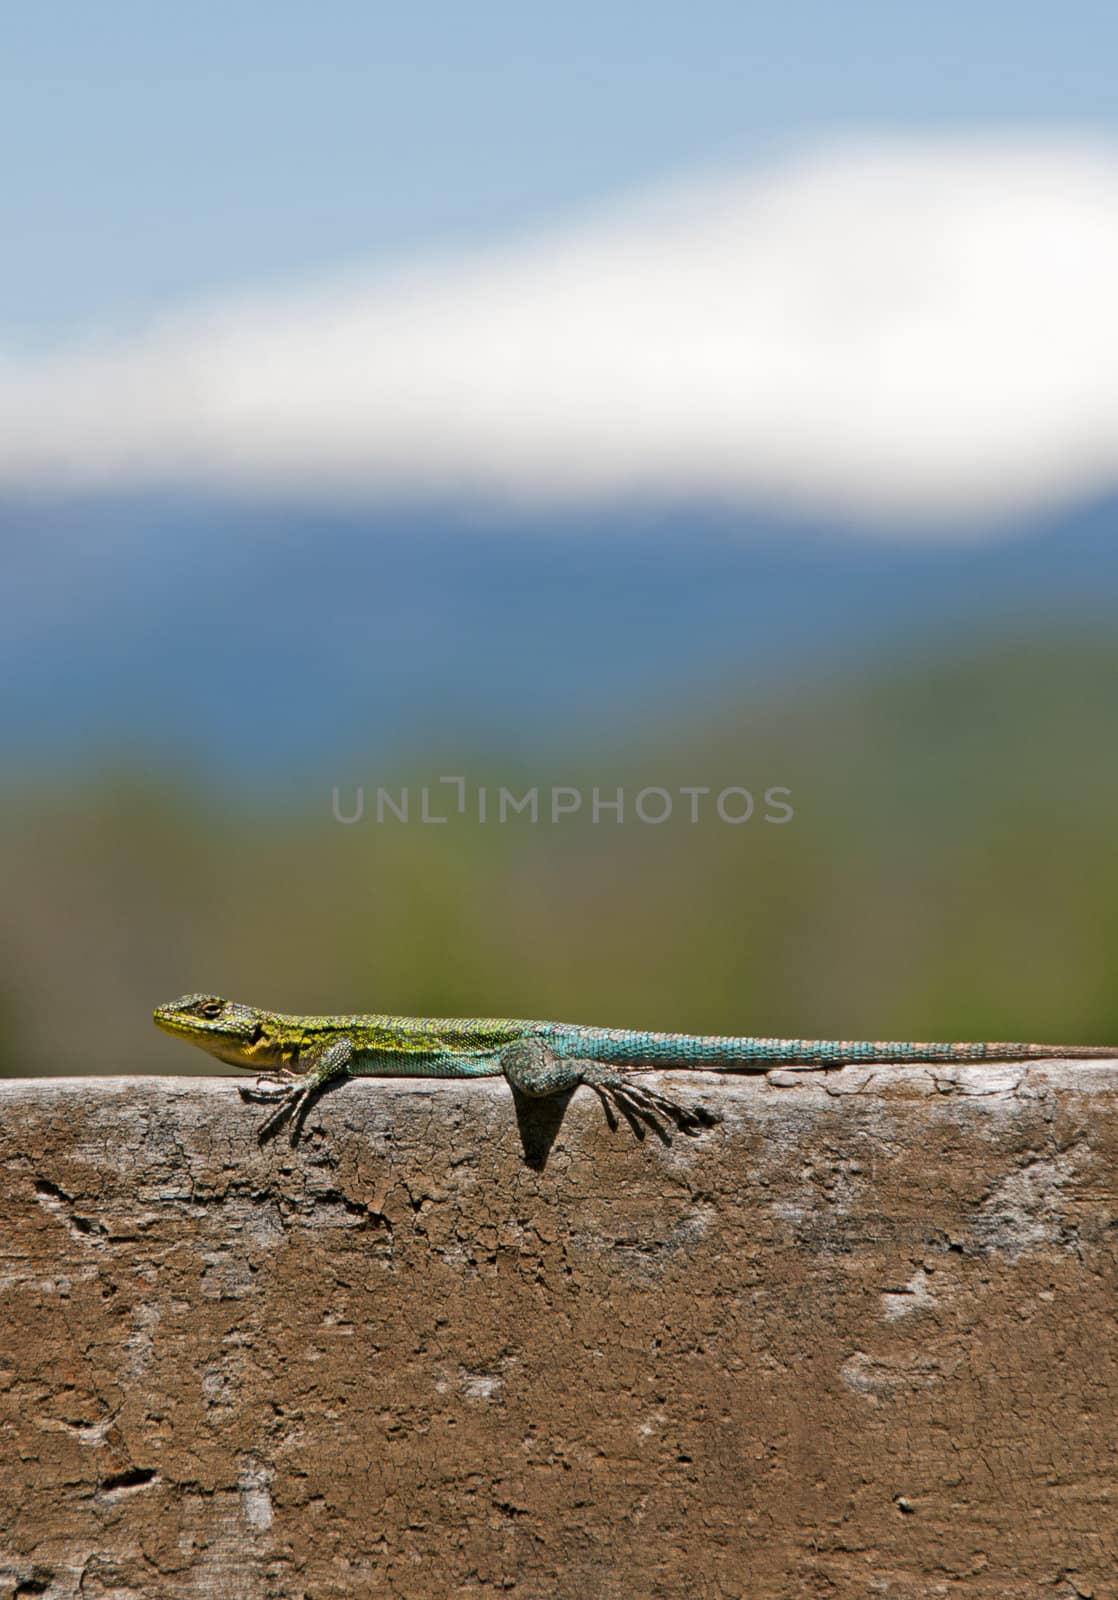 A curious Iguana in Pucon, Chile 